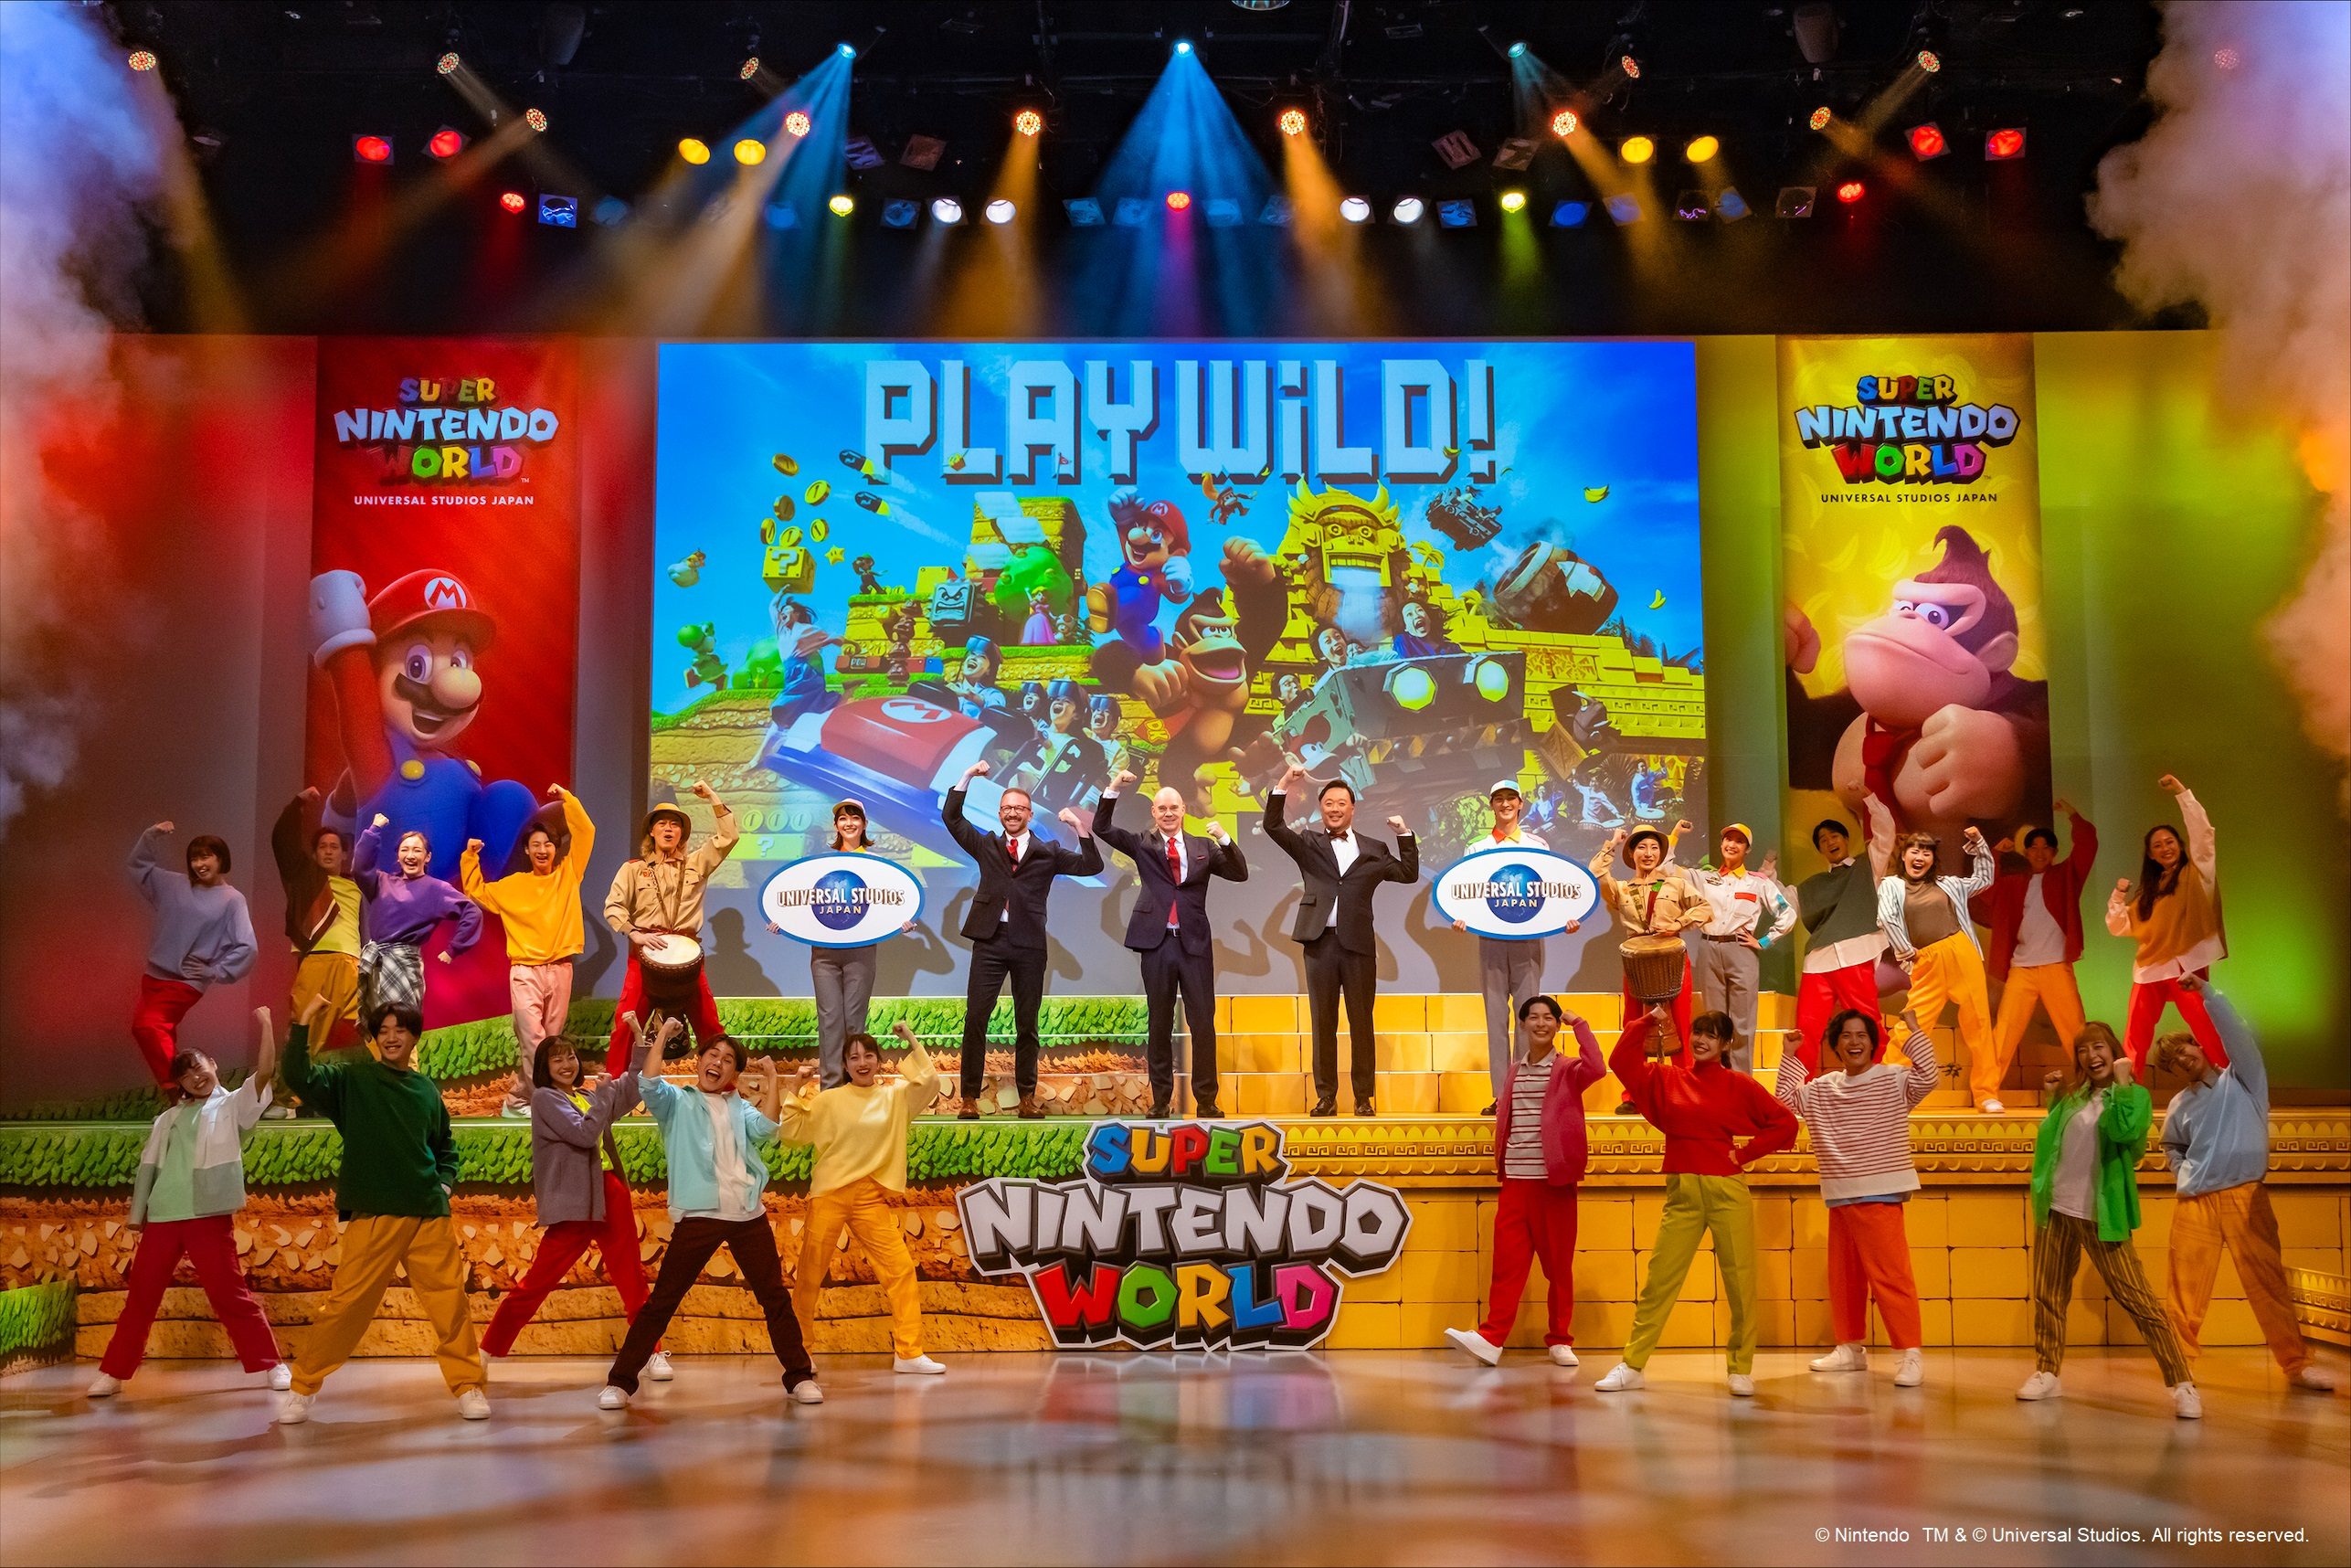 A group of people posing on stage for a Super Nintendo World press conference